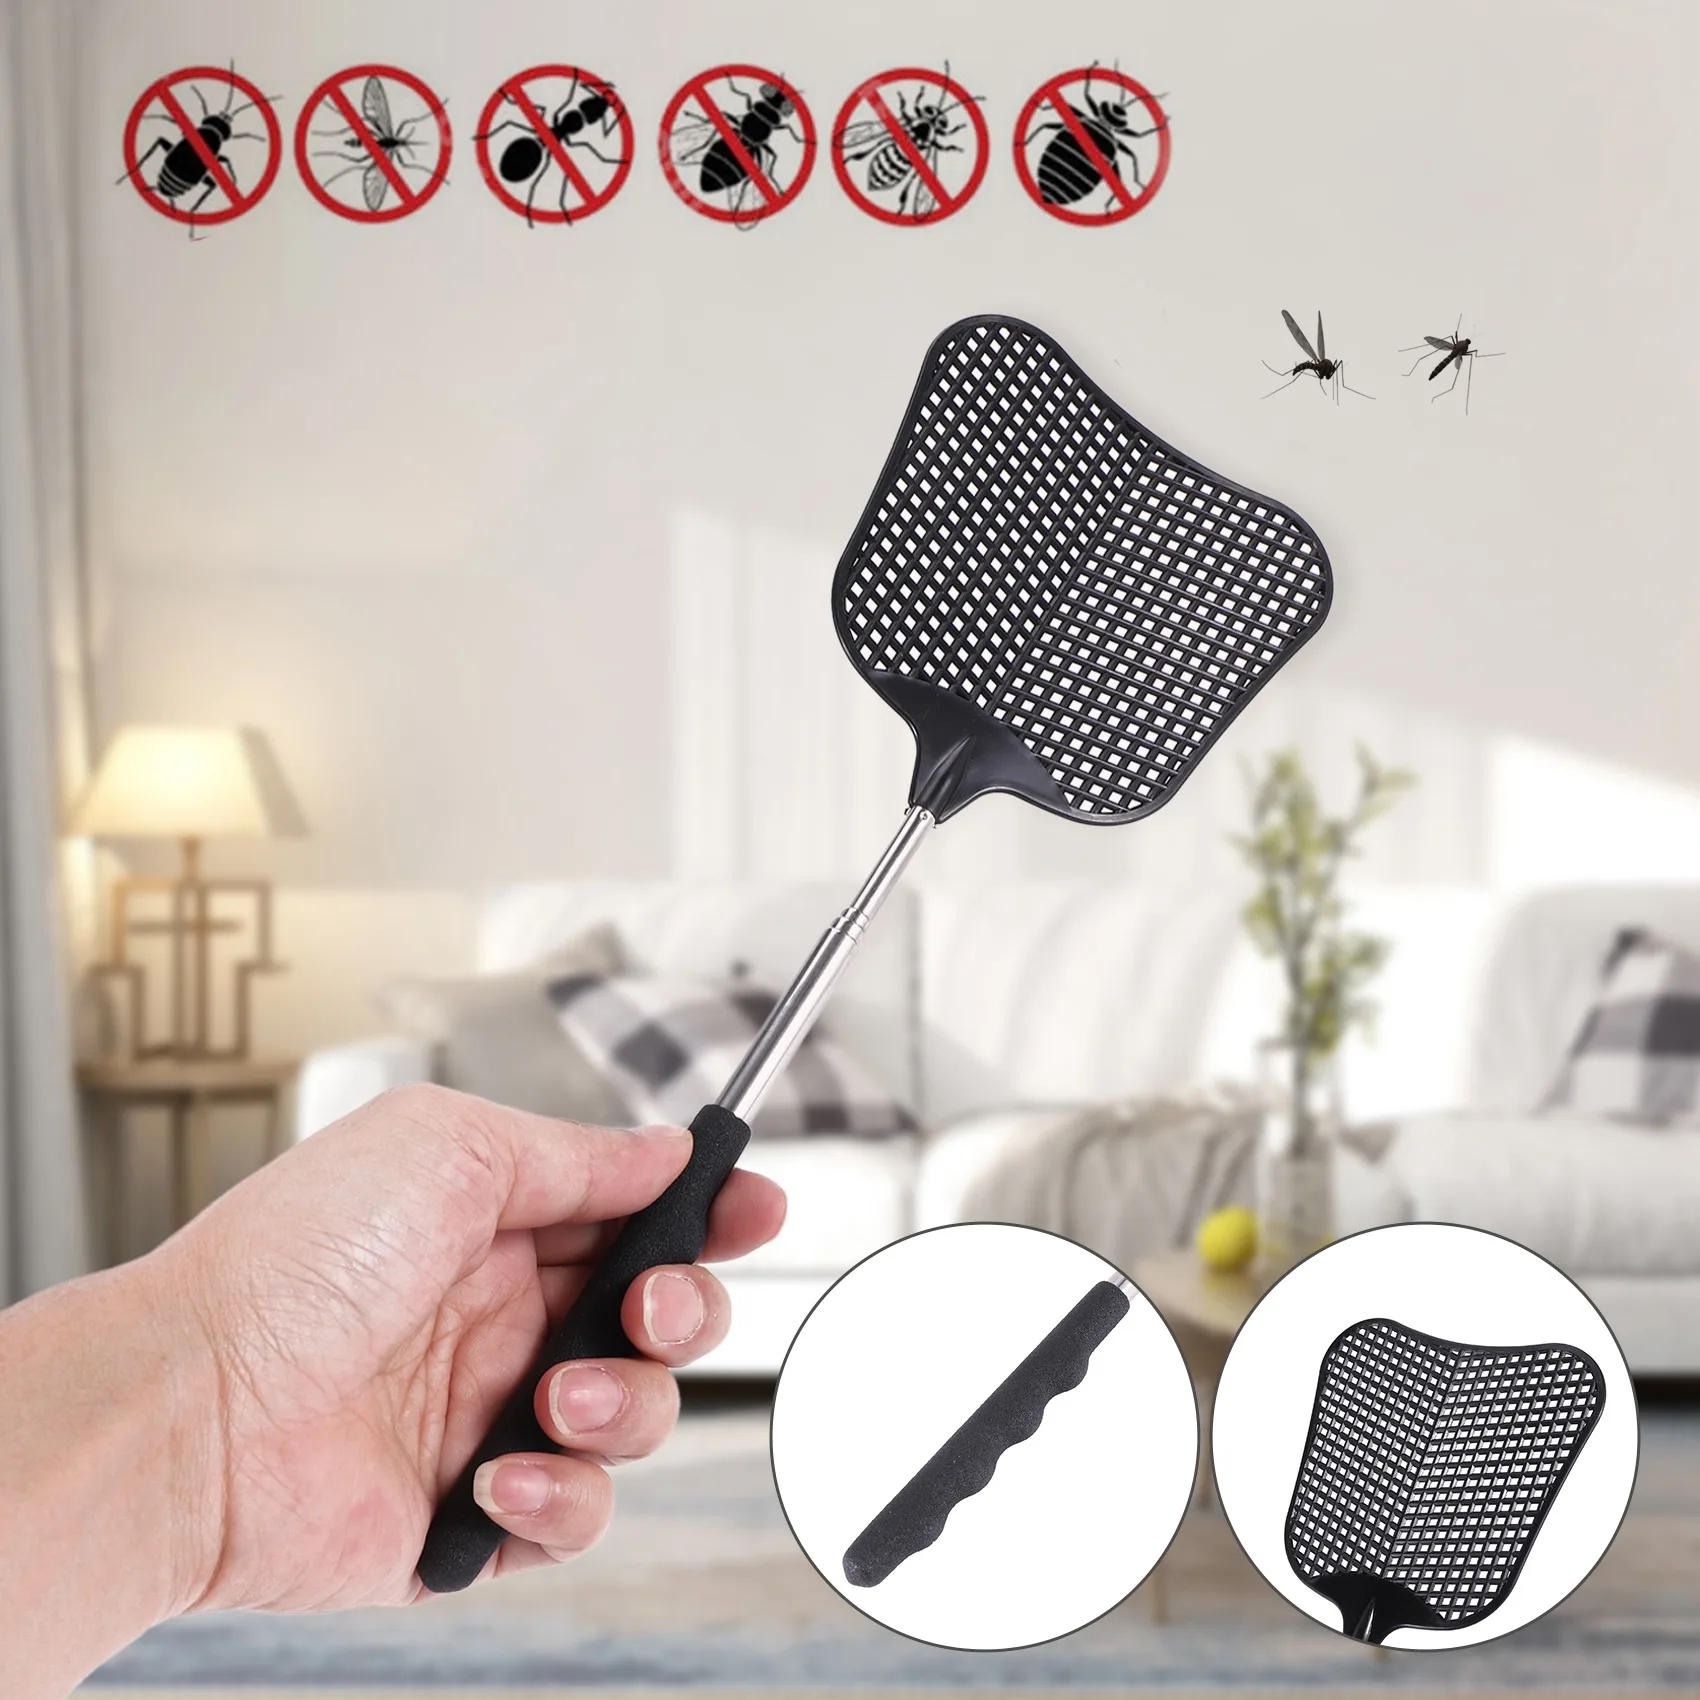 

Mosquito and Fly Killing Plastic Fly Swatter Retractable Stainless Steel Rod, Suitable for Indoor and Outdoor Use (2 Pack)